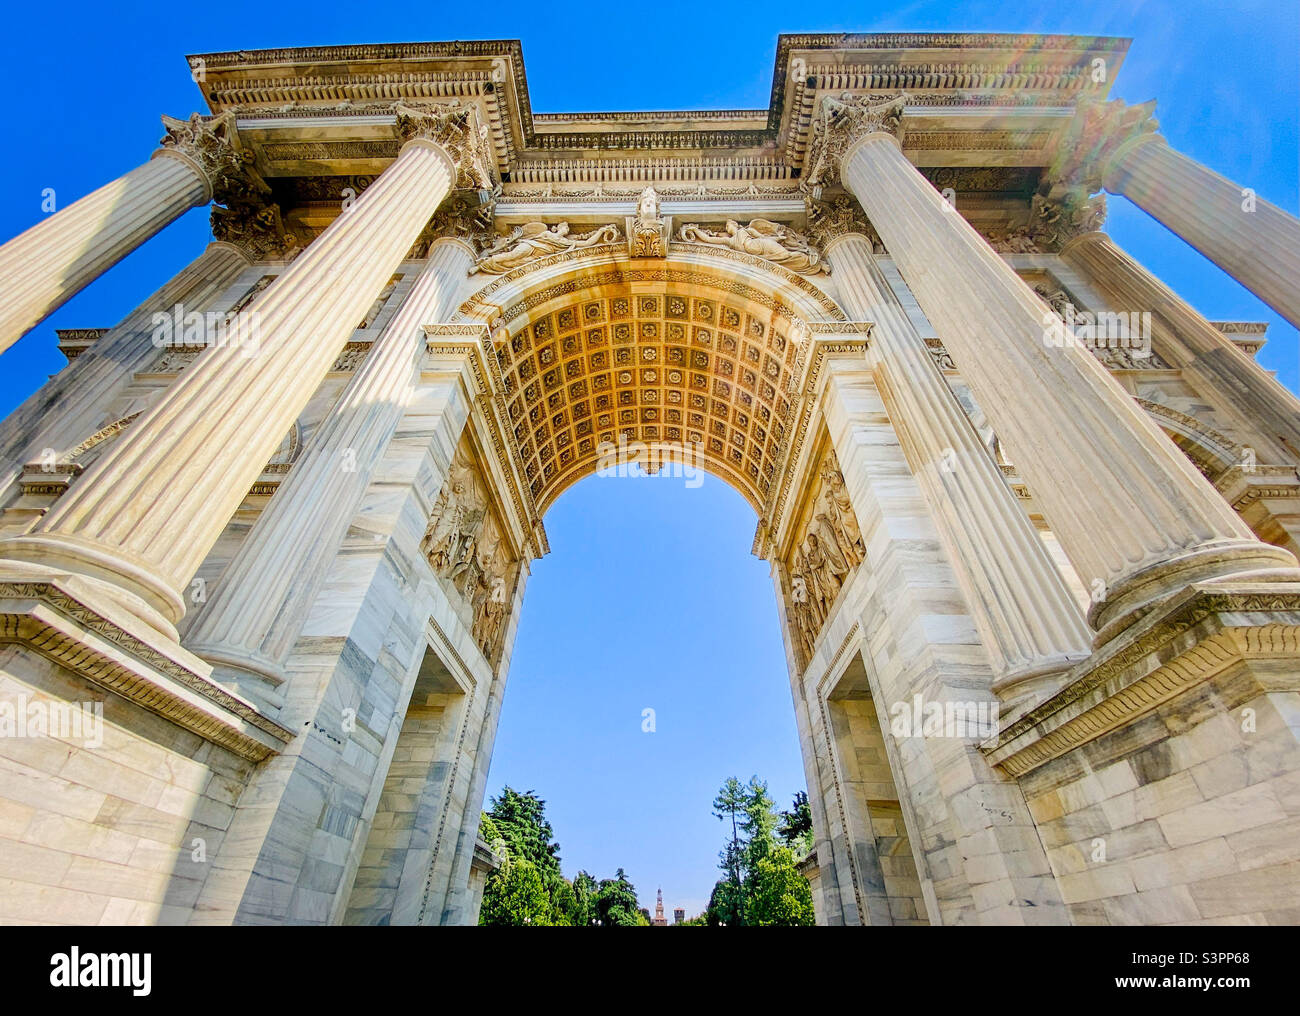 Perspective view of the Arco della Pace ('Arch of Peace') in the Porta Sempione, the city gate to historic Milan Stock Photo